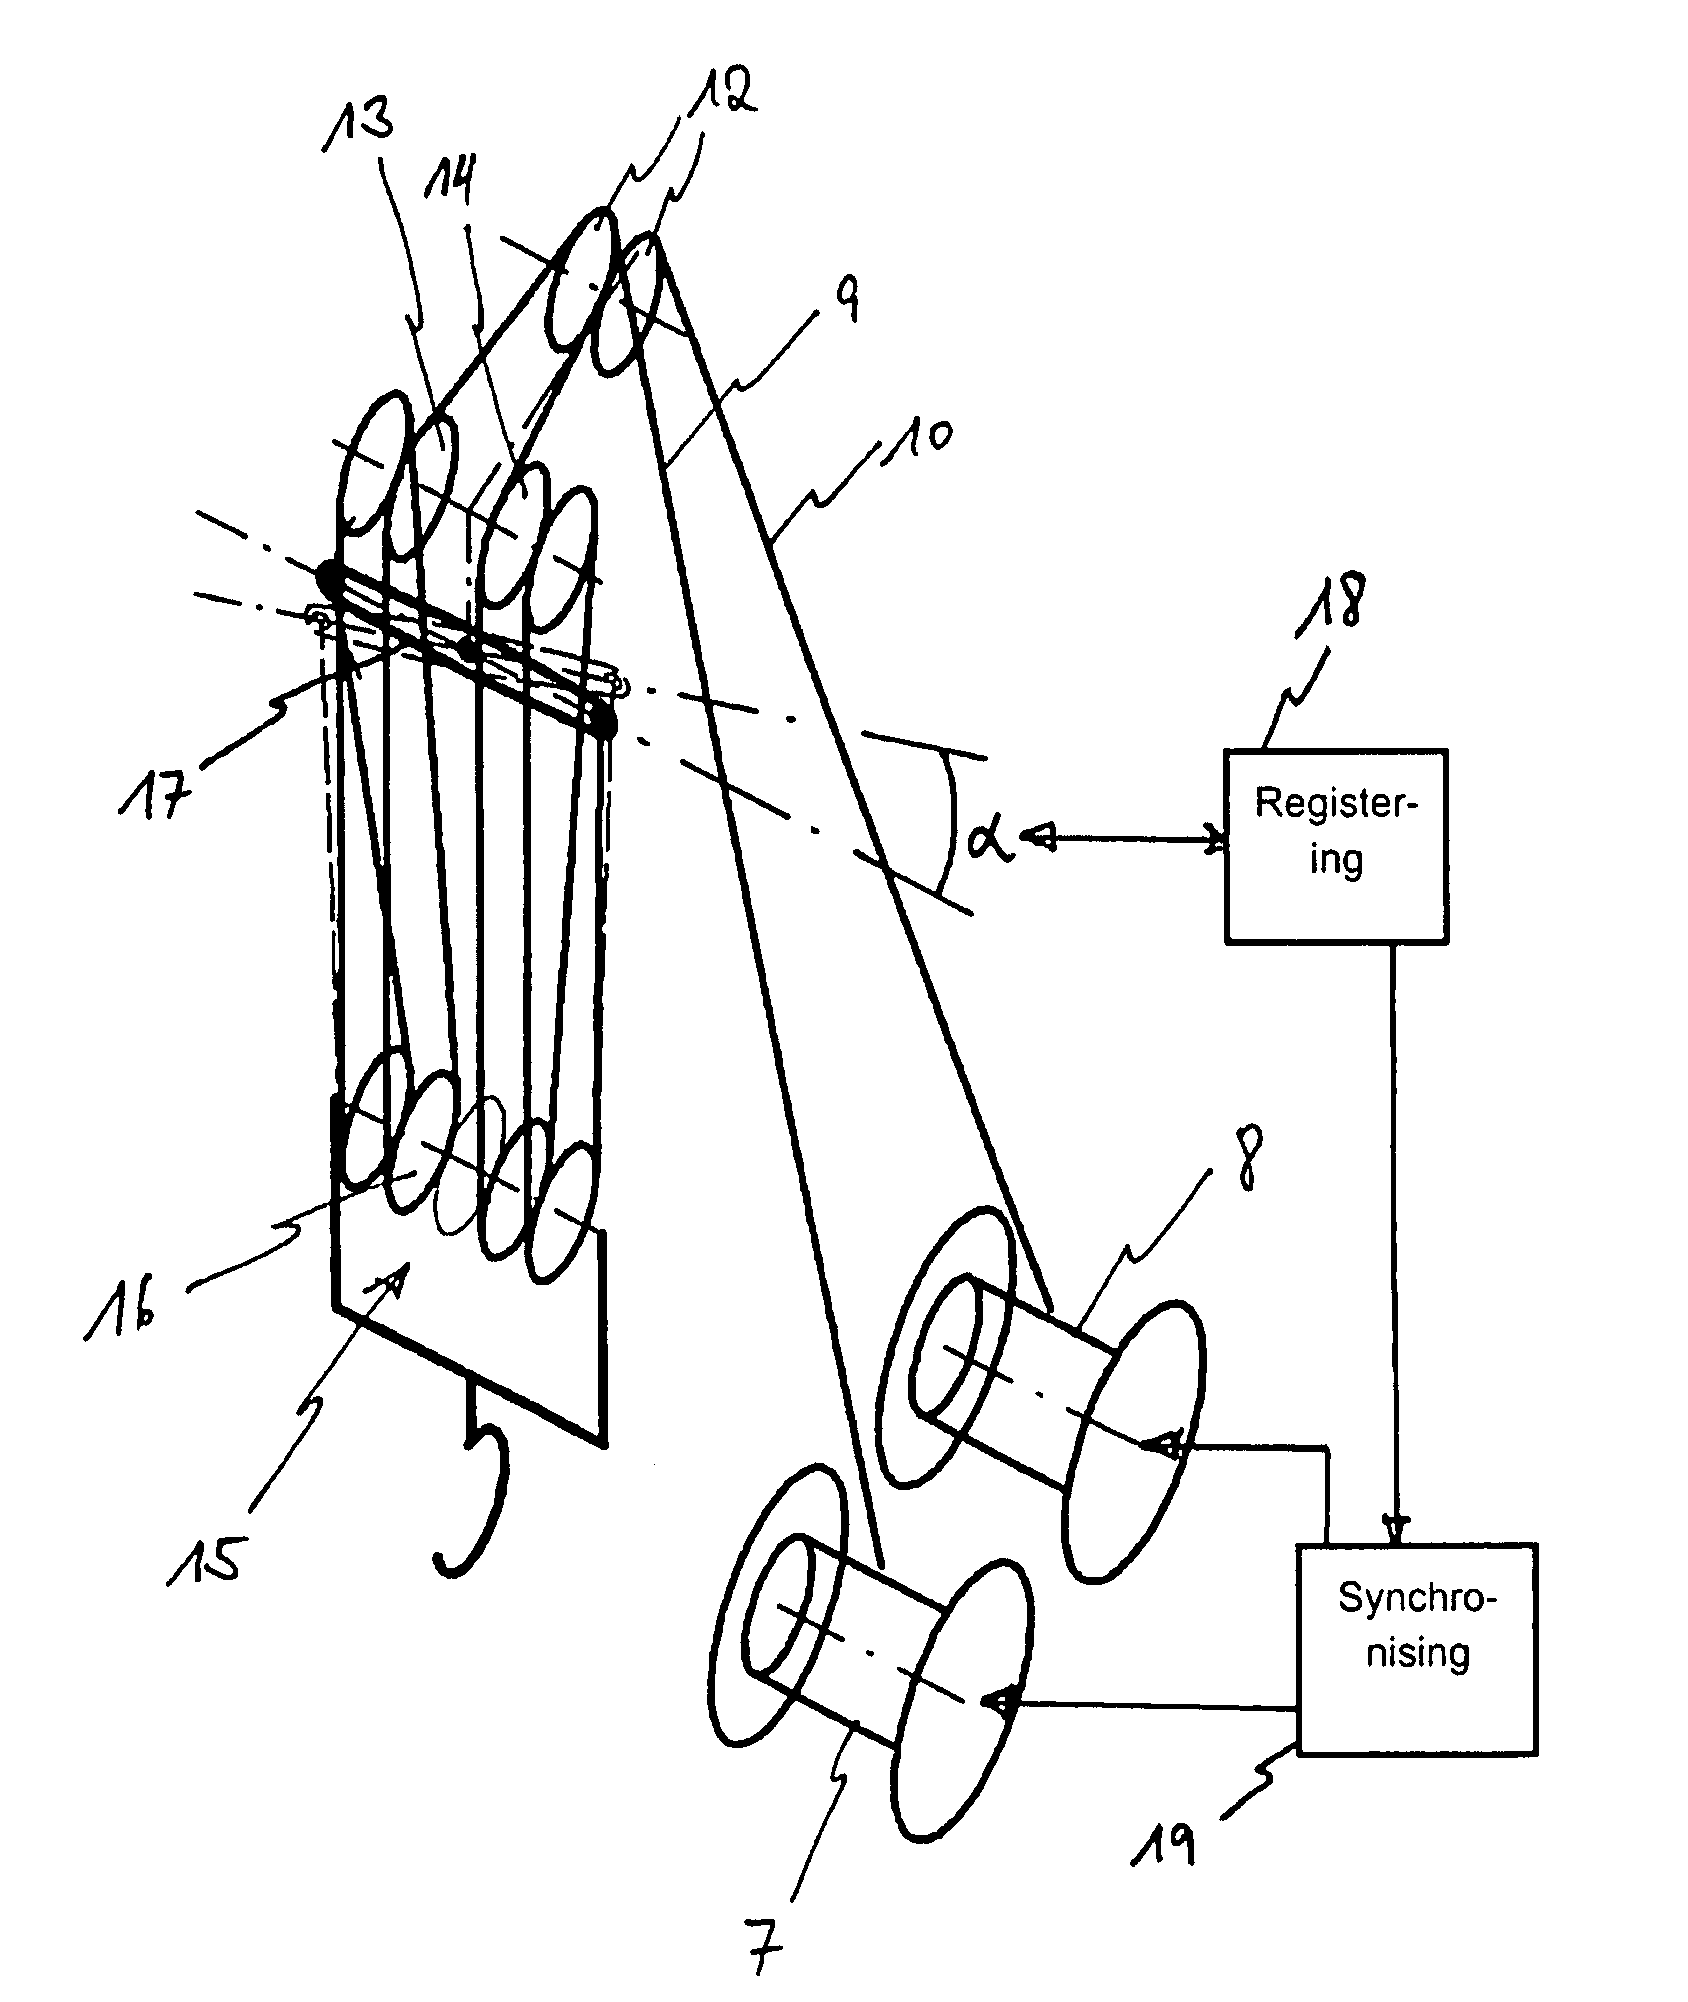 Hoisting-cable drive comprising a single bottom-hook block and two winches